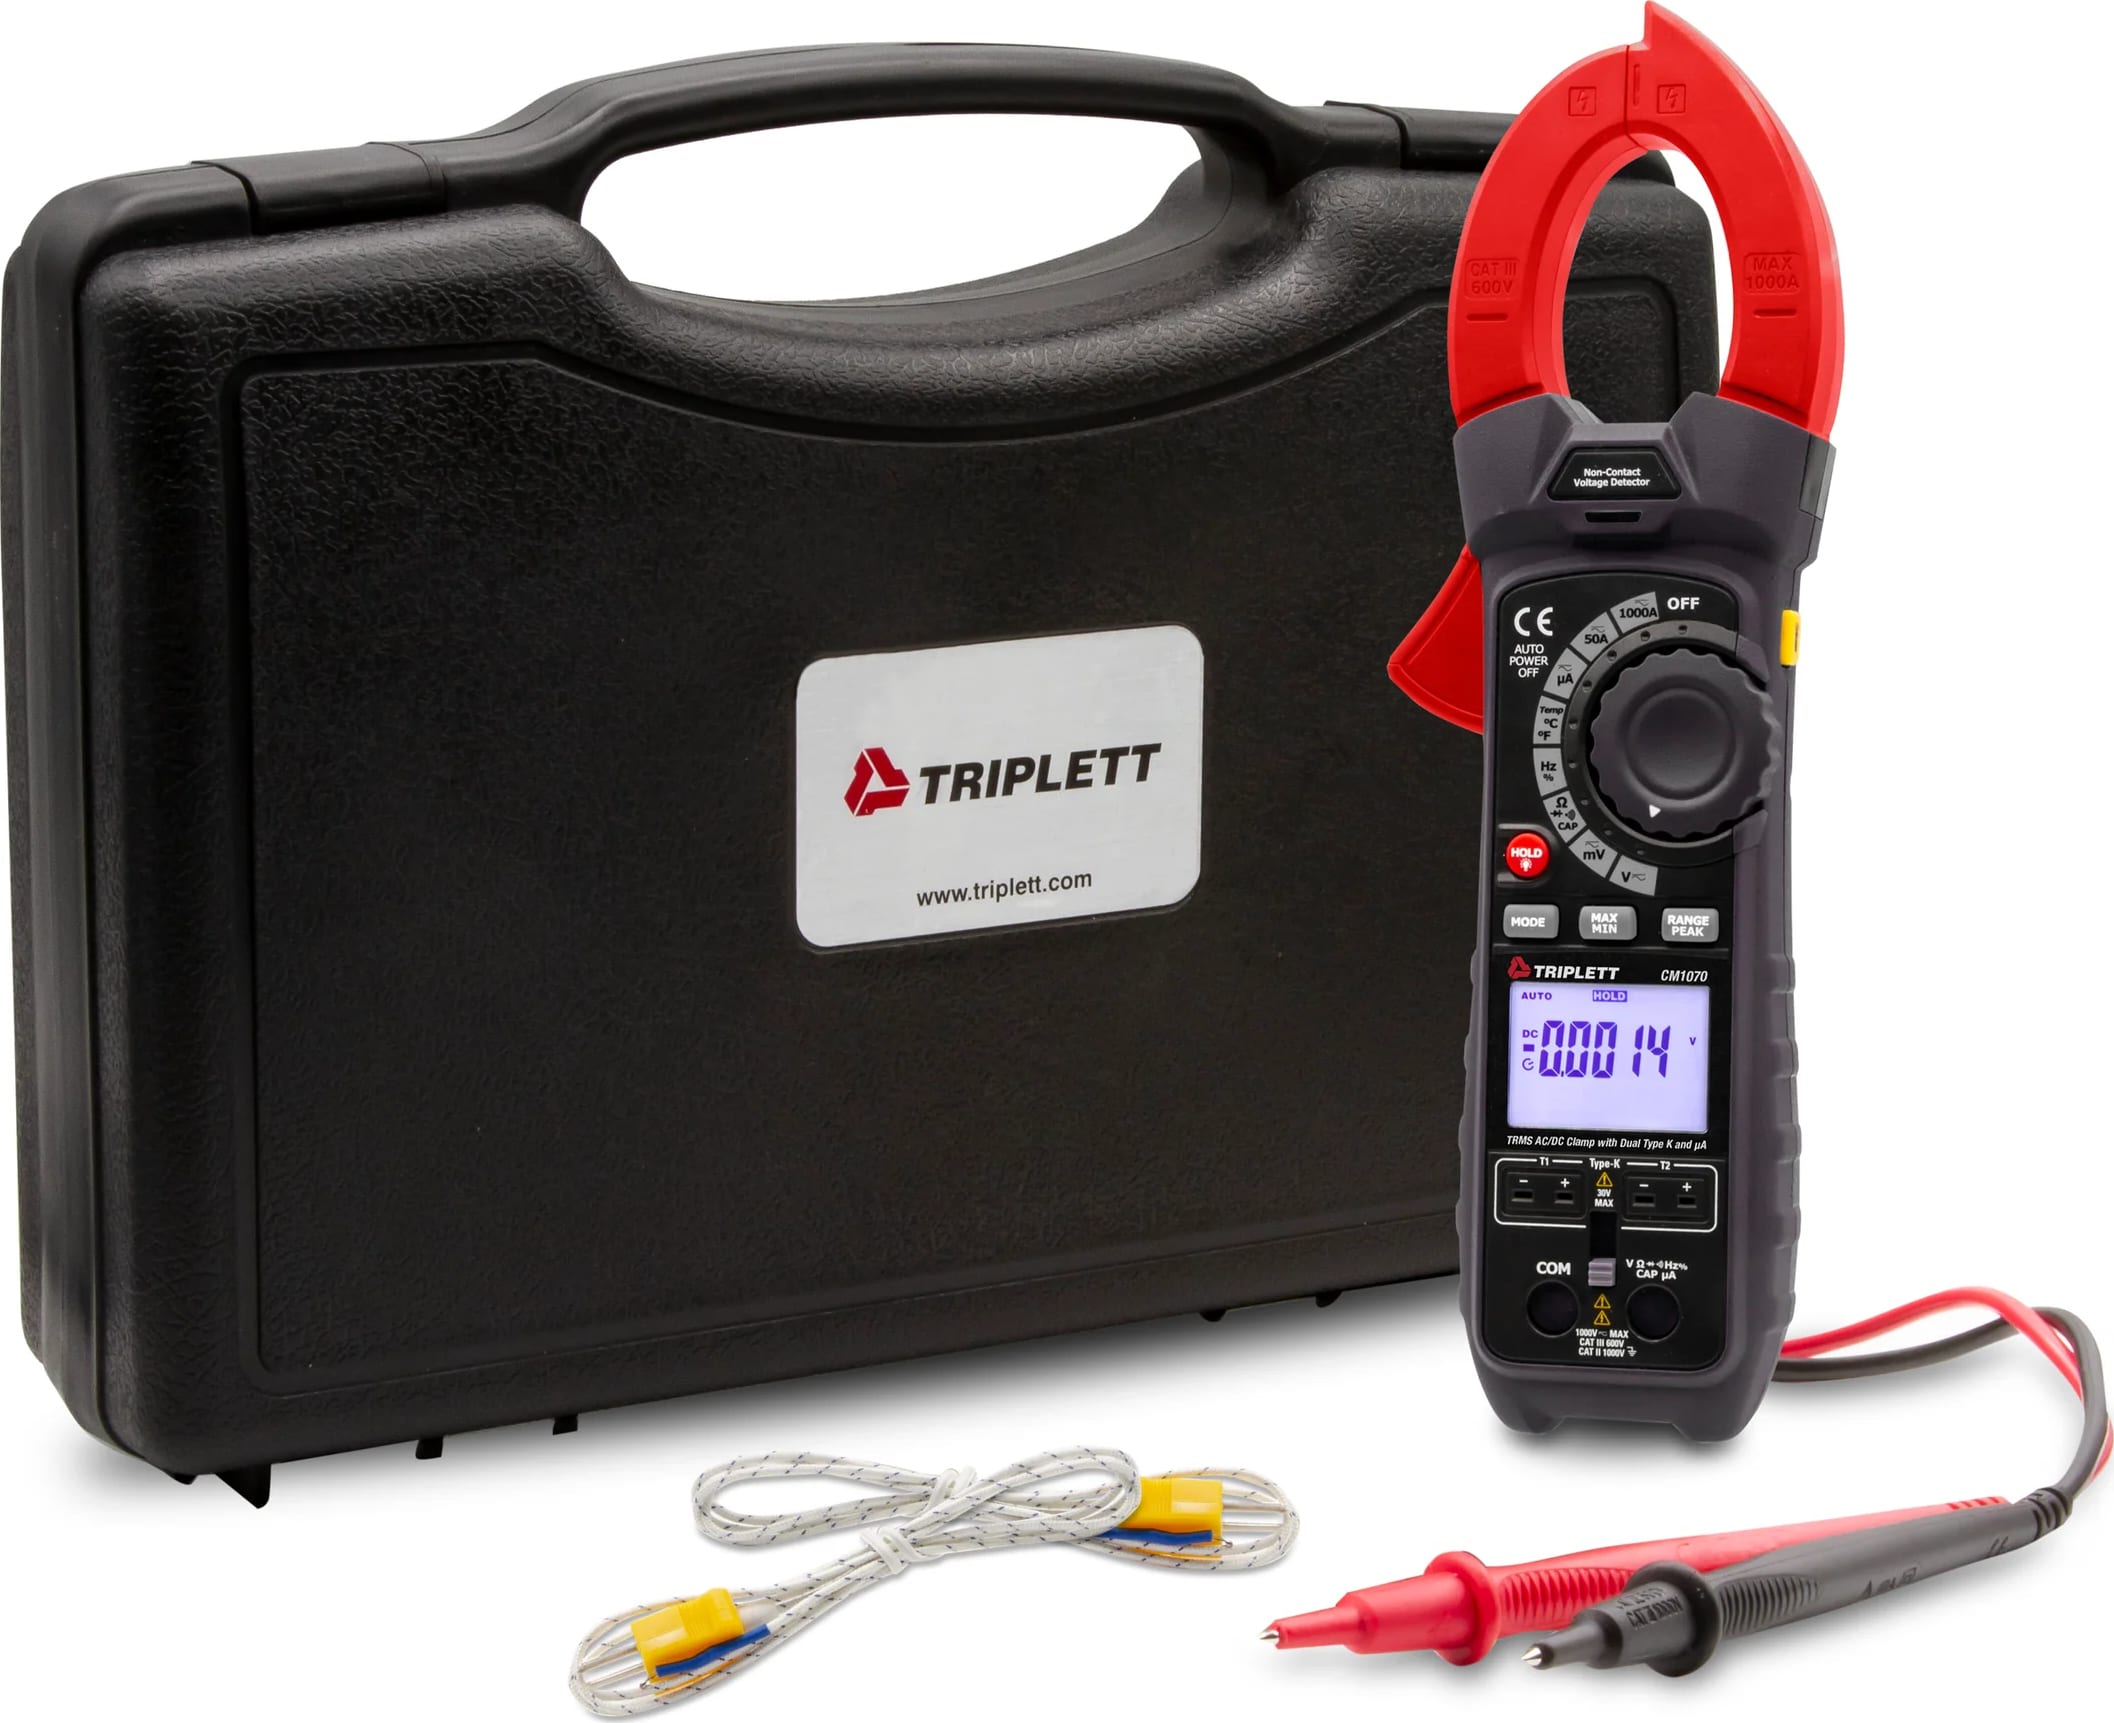 Triplett CM1070 - True RMS Clamp Meter with Type-K Probes, Test Leads, and Carrying Case